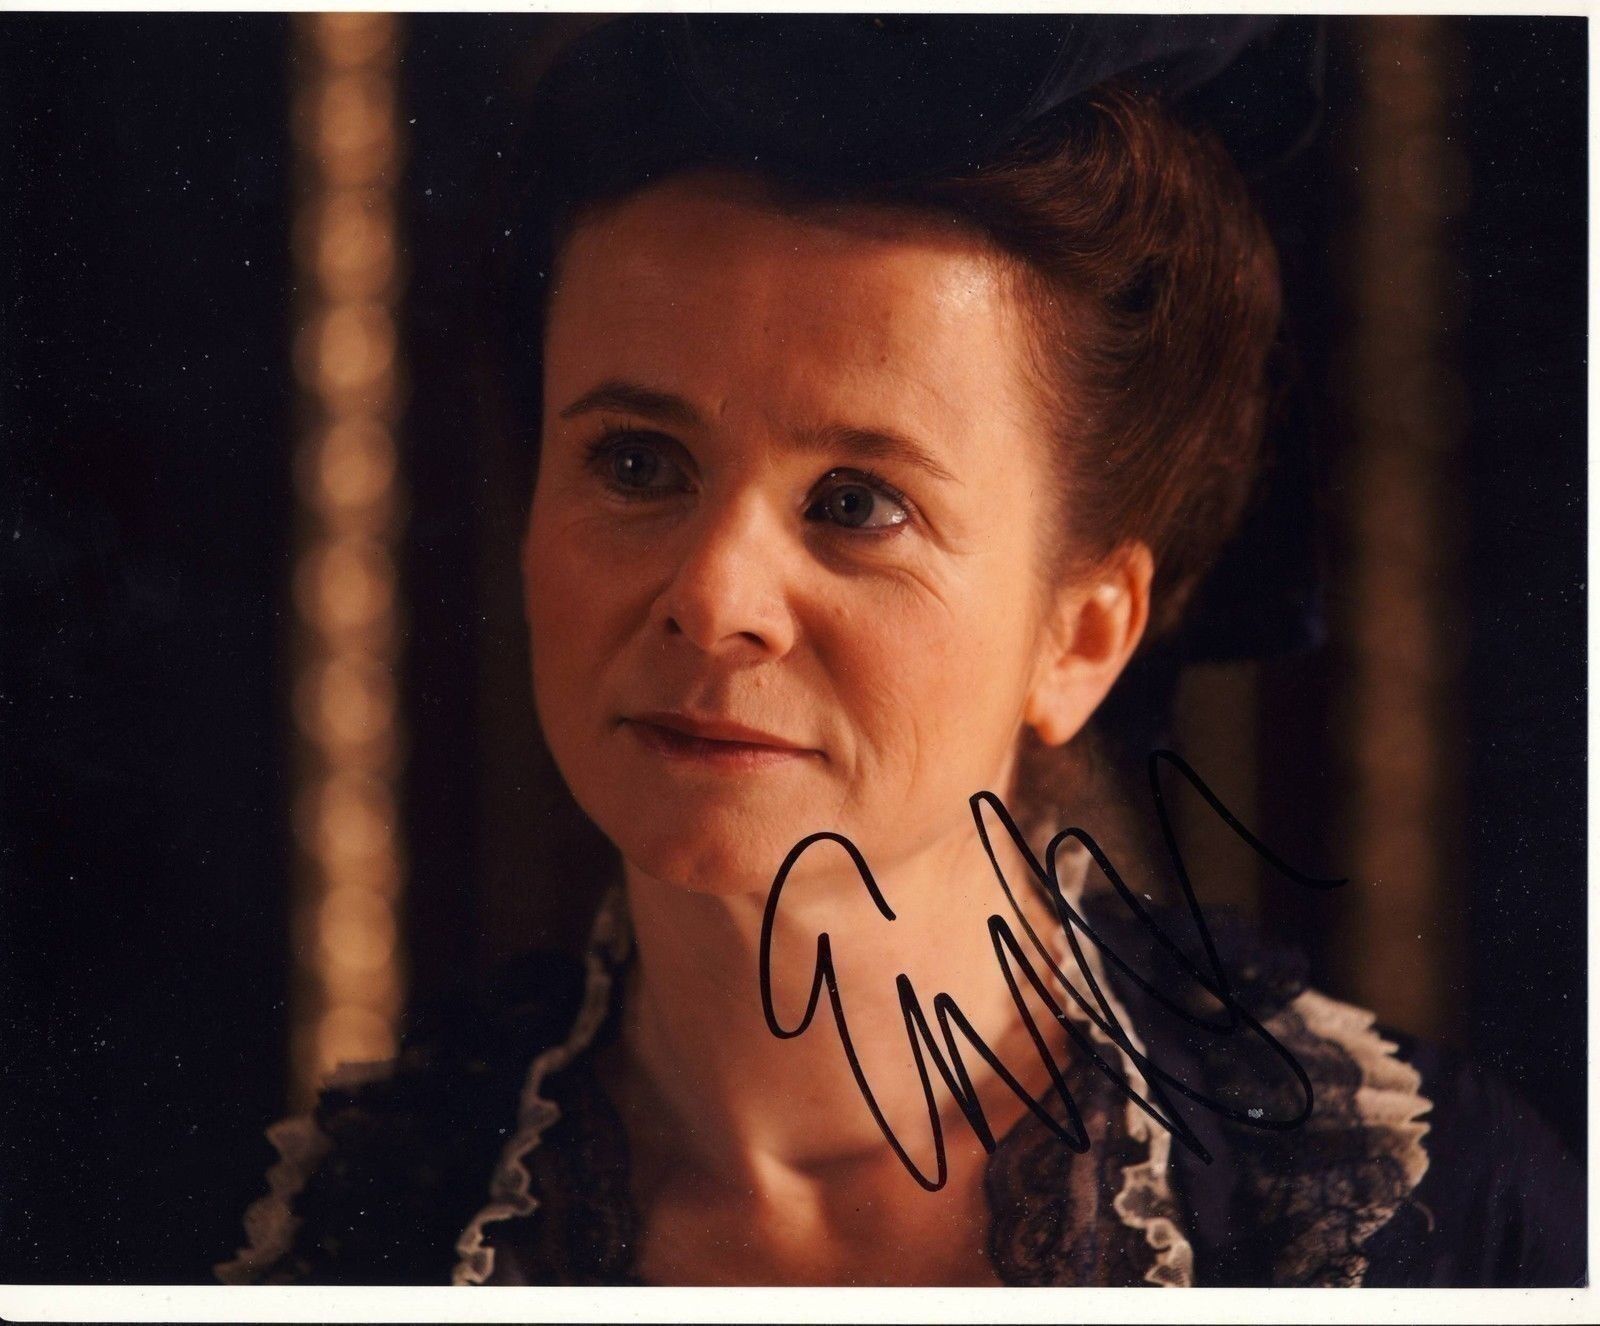 Emily Watson Autograph Signed 8x10 Photo Poster painting AFTAL [7310]